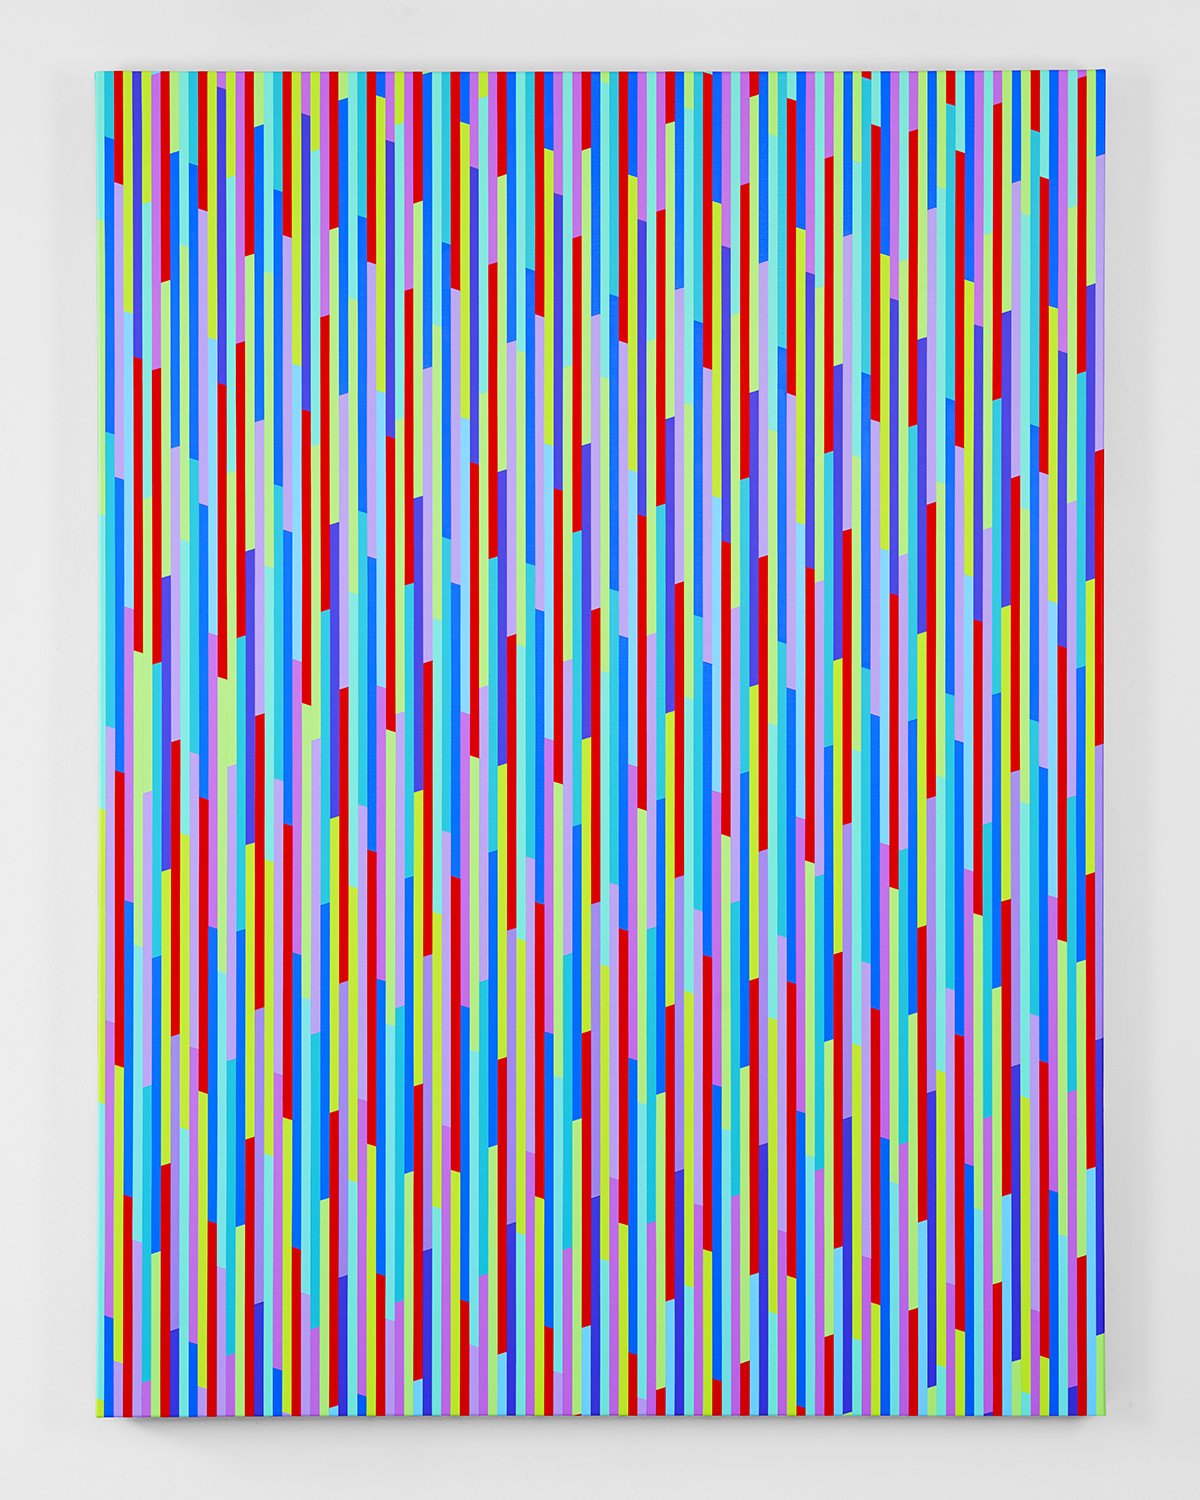 Untitled (Diffraction)